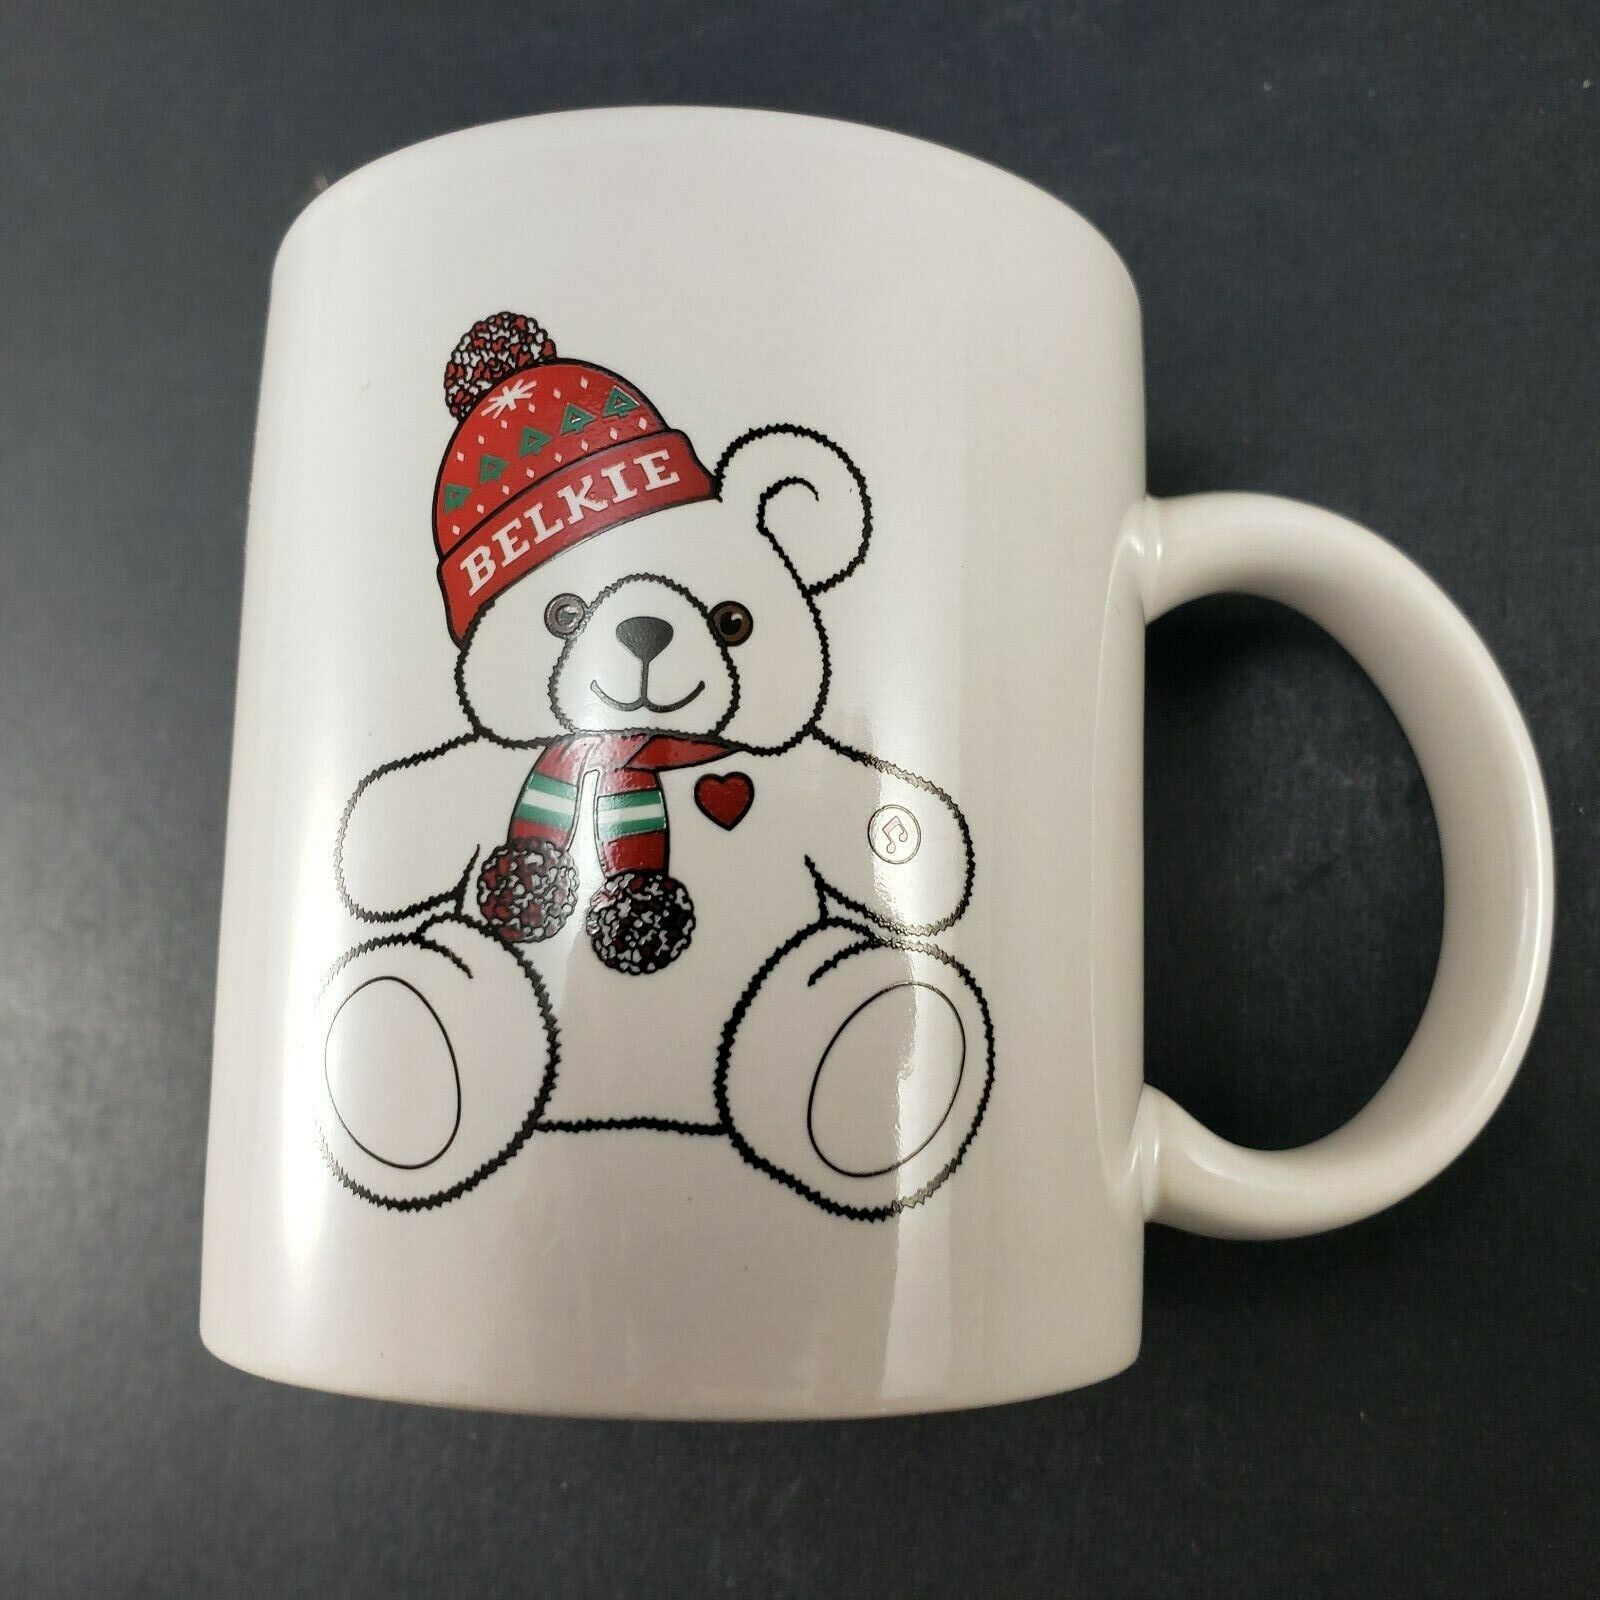 Belkie Bear Coffee Mug from Belks Department Store White Cup with Bear Figures